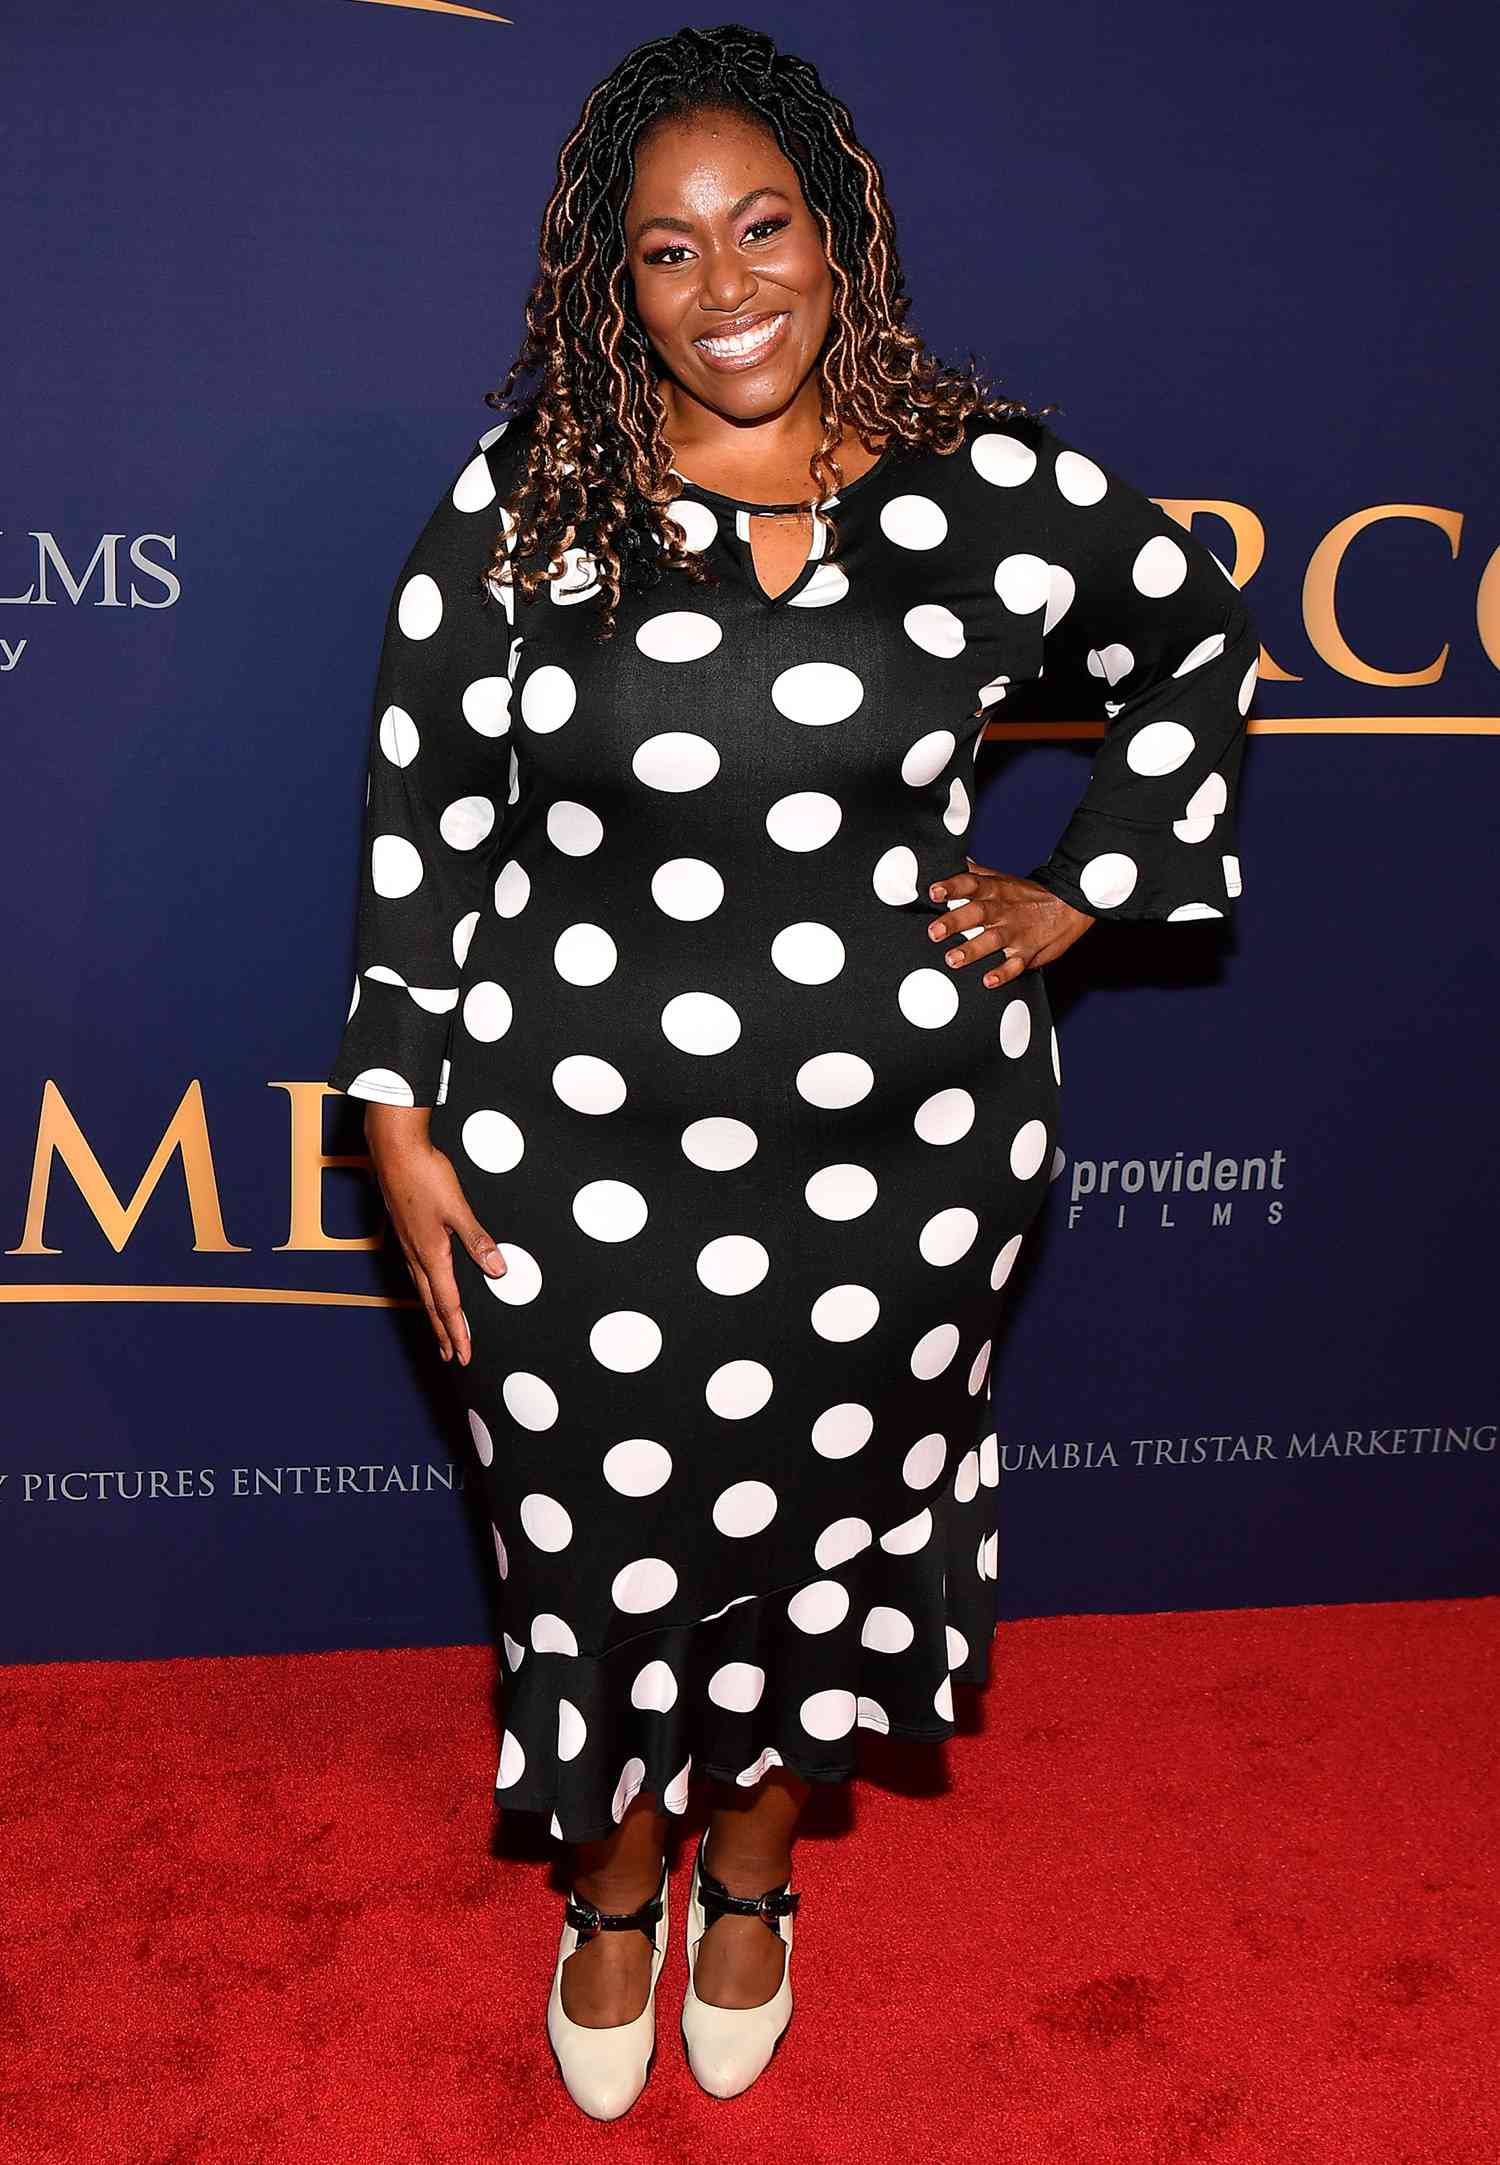 Mandisa attends the premiere of "Overcomer" at The Woodruff Arts Center & Symphony Hall 